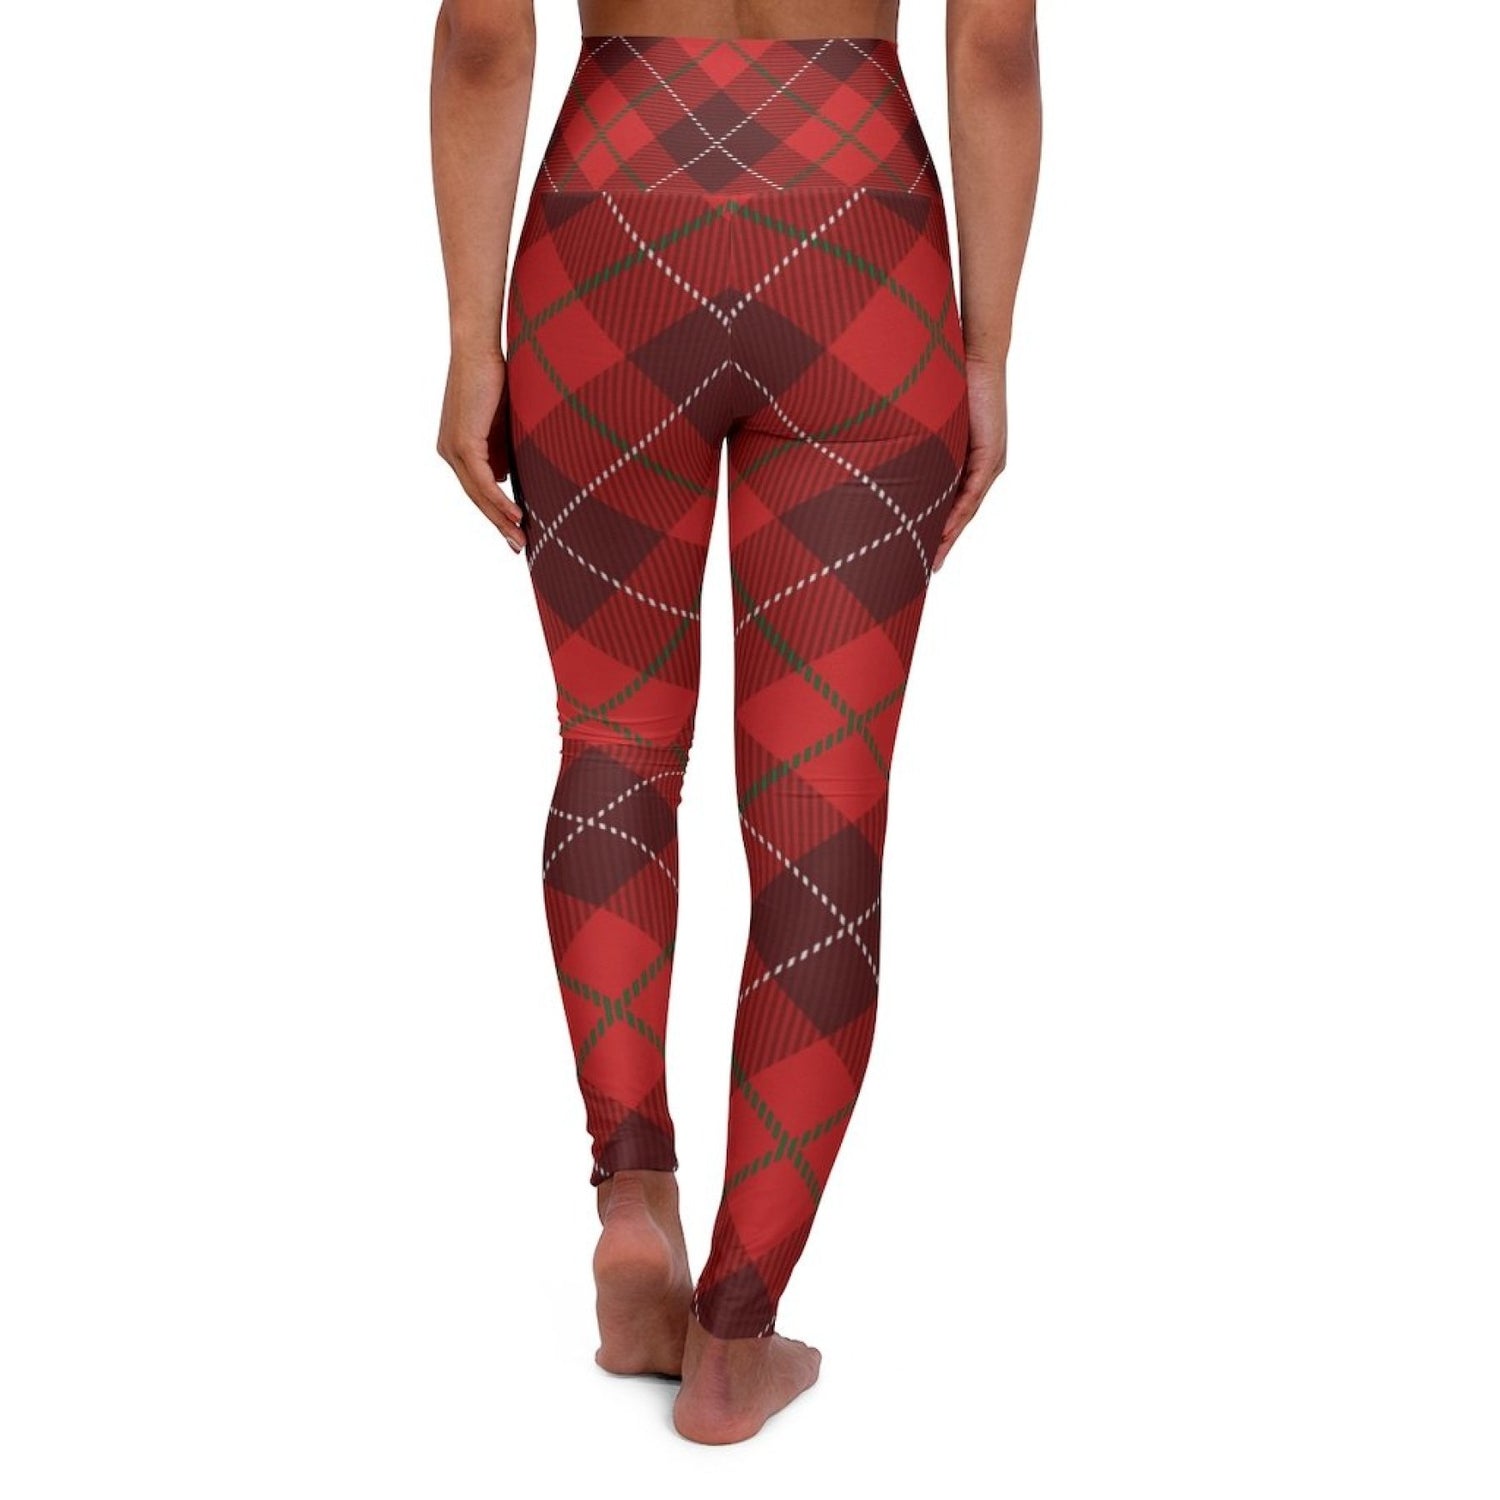 Womens Leggings, Red Plaid Style High Waisted Fitness Pants